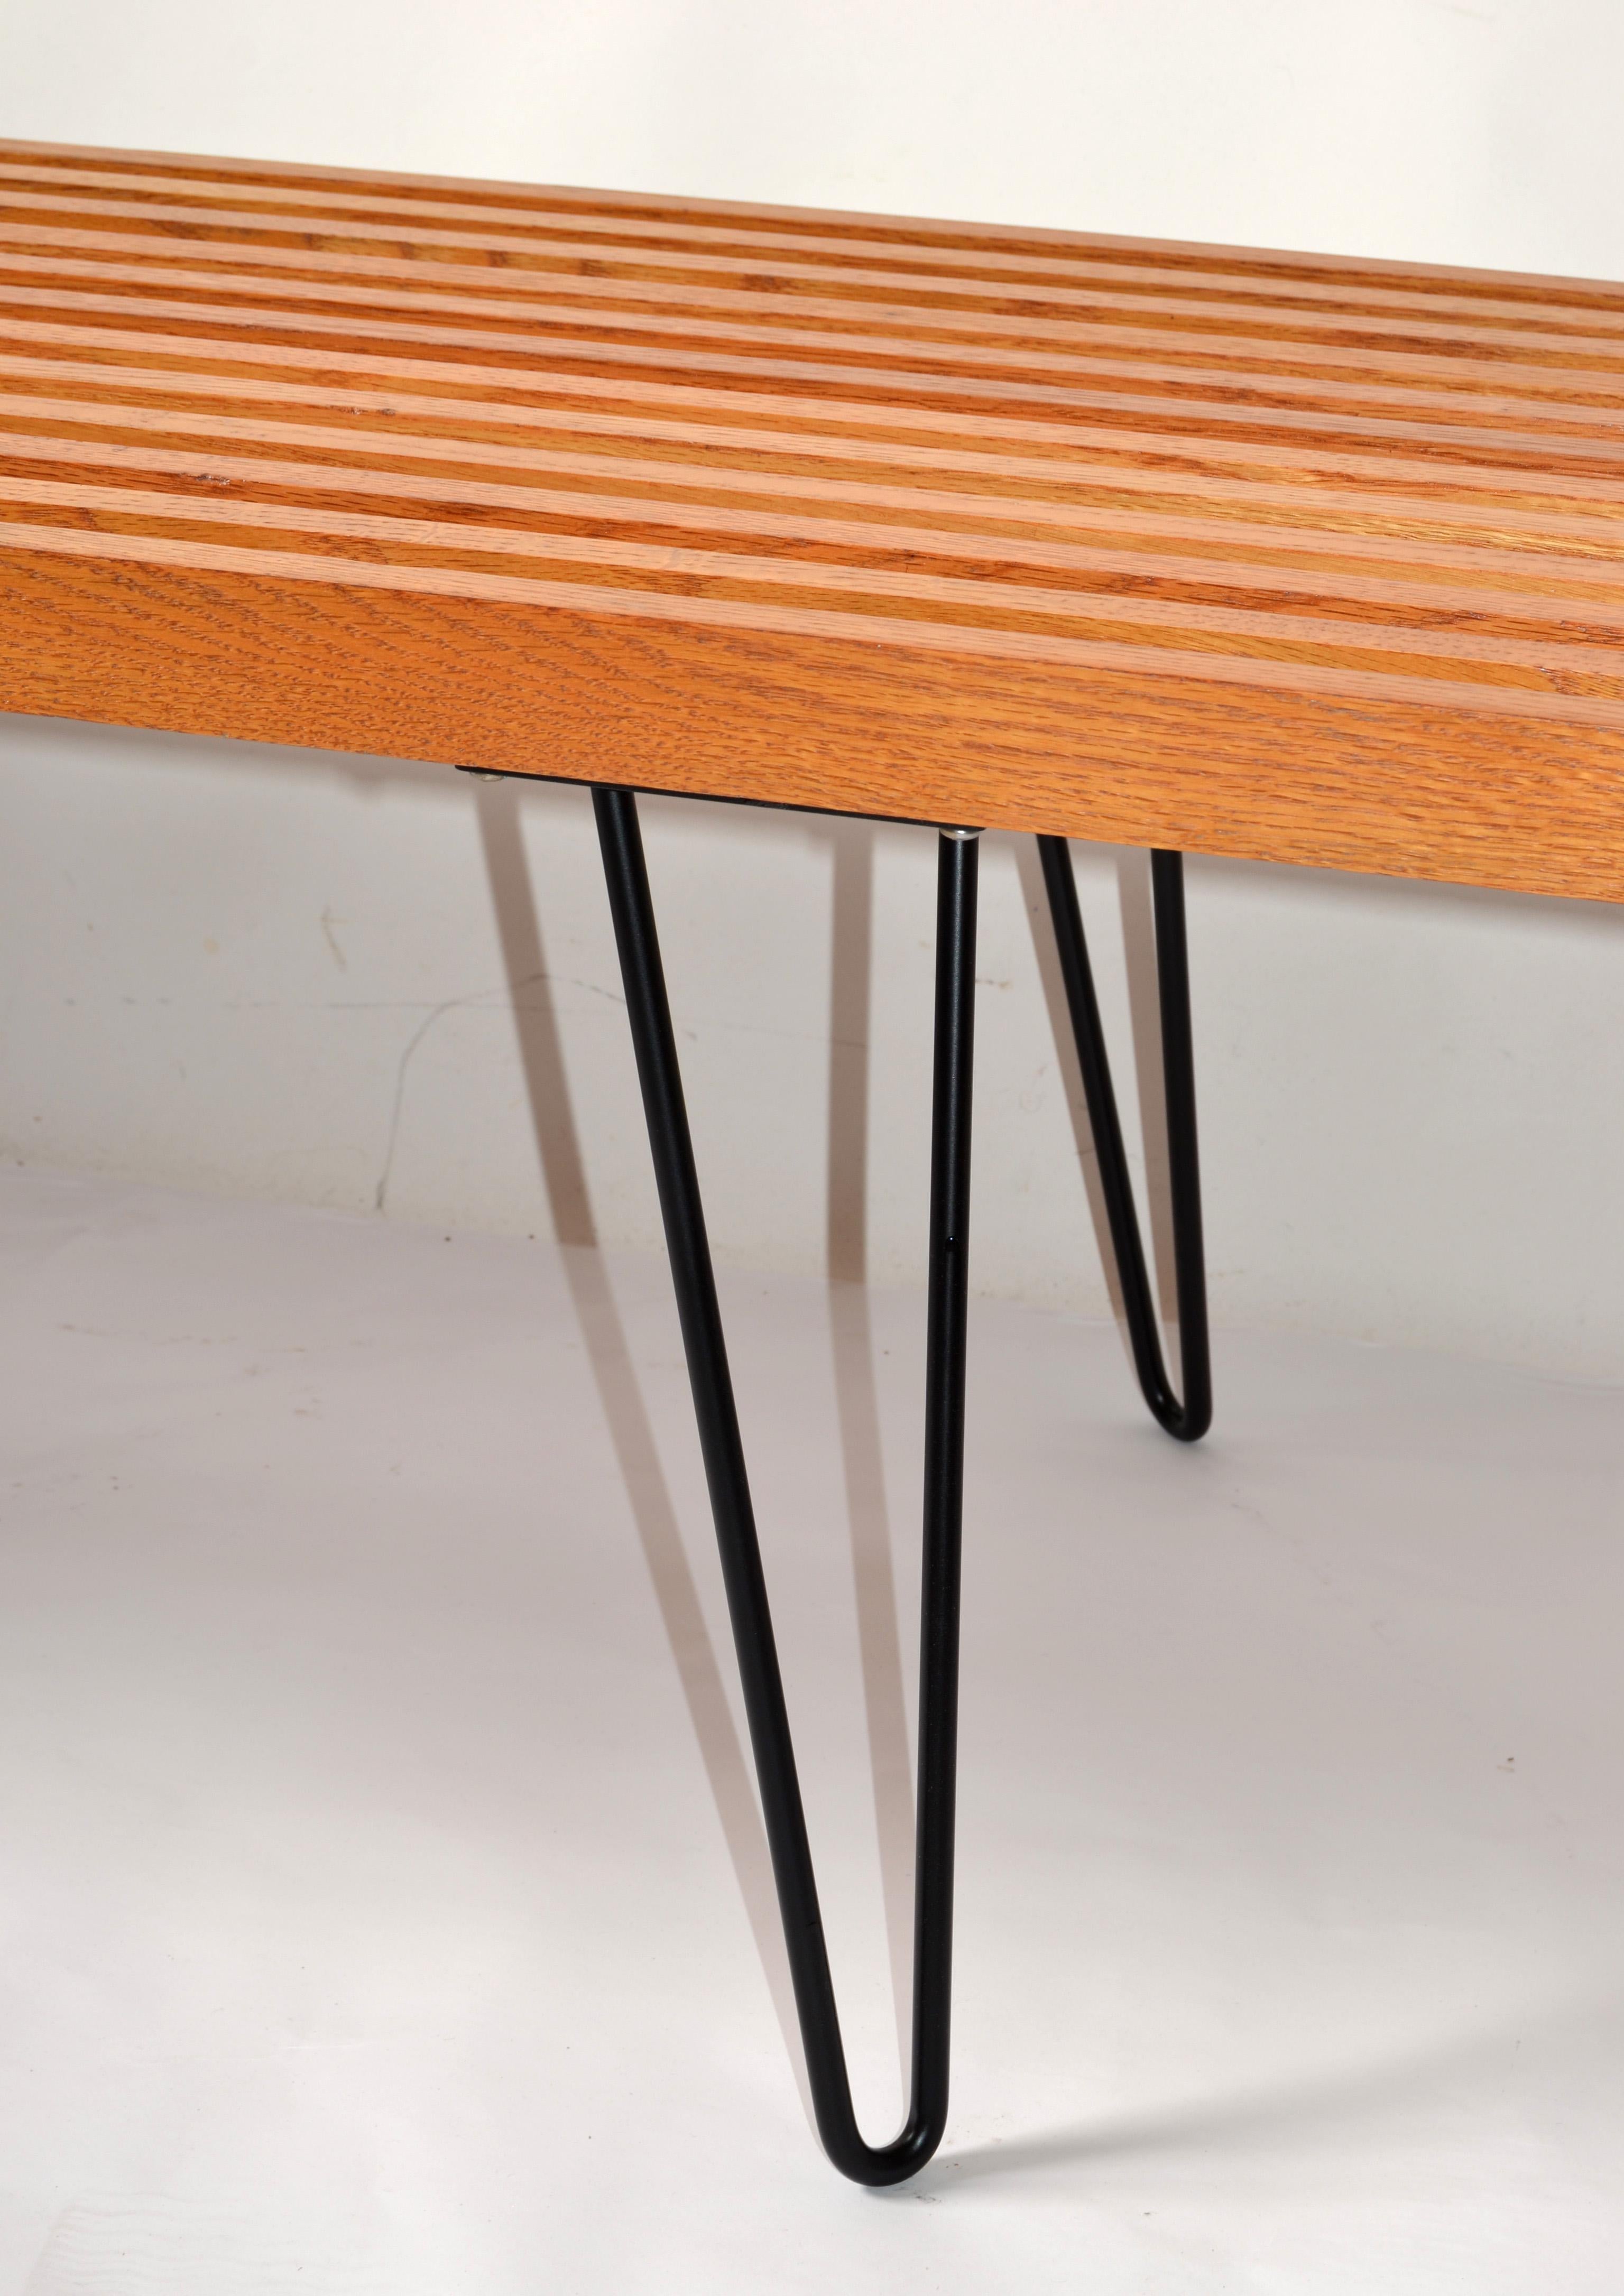 George Nelson Style Oak Slat Bench With Steel Hairpin Legs Attributed to Knoll For Sale 4